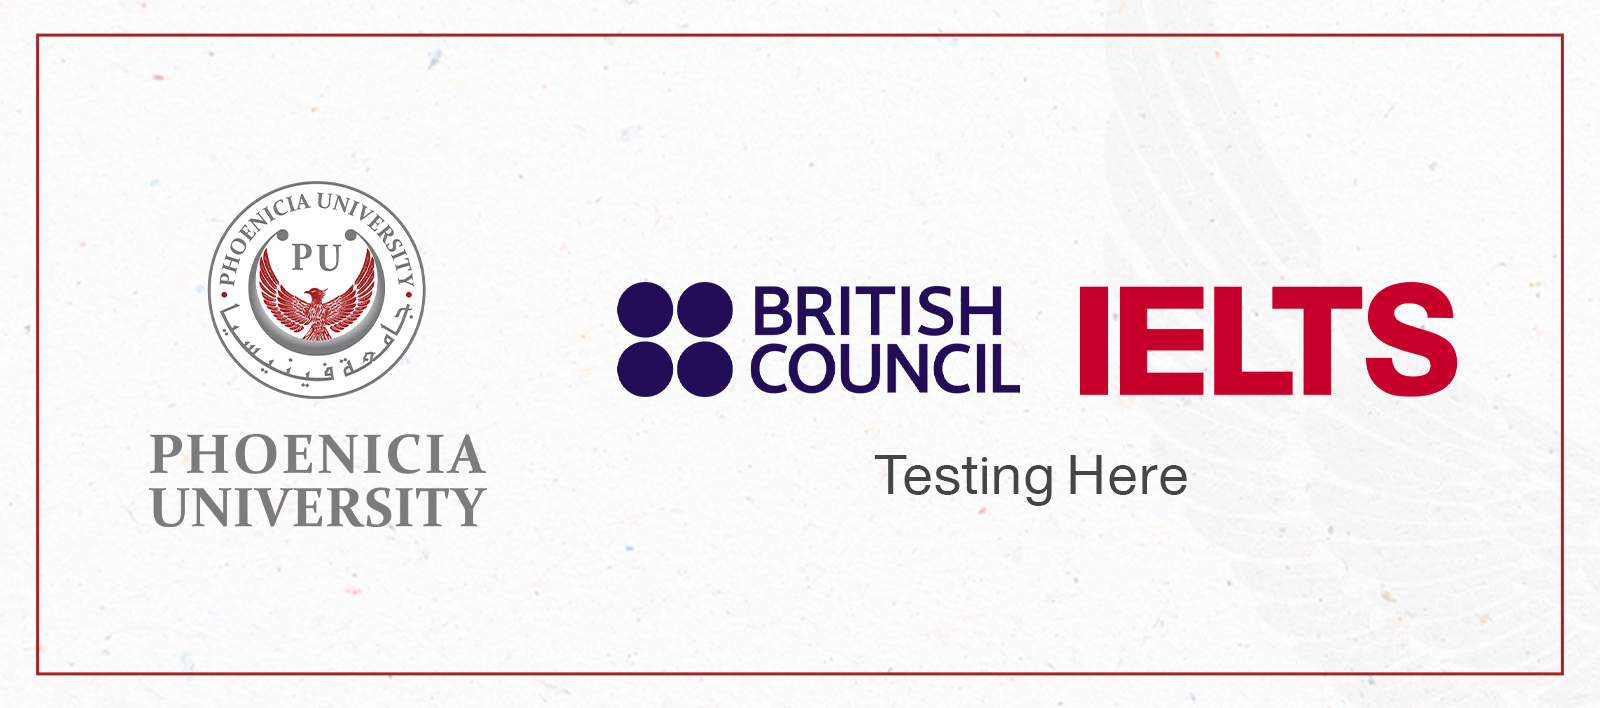 Phoenicia University's Partnership with the British Council